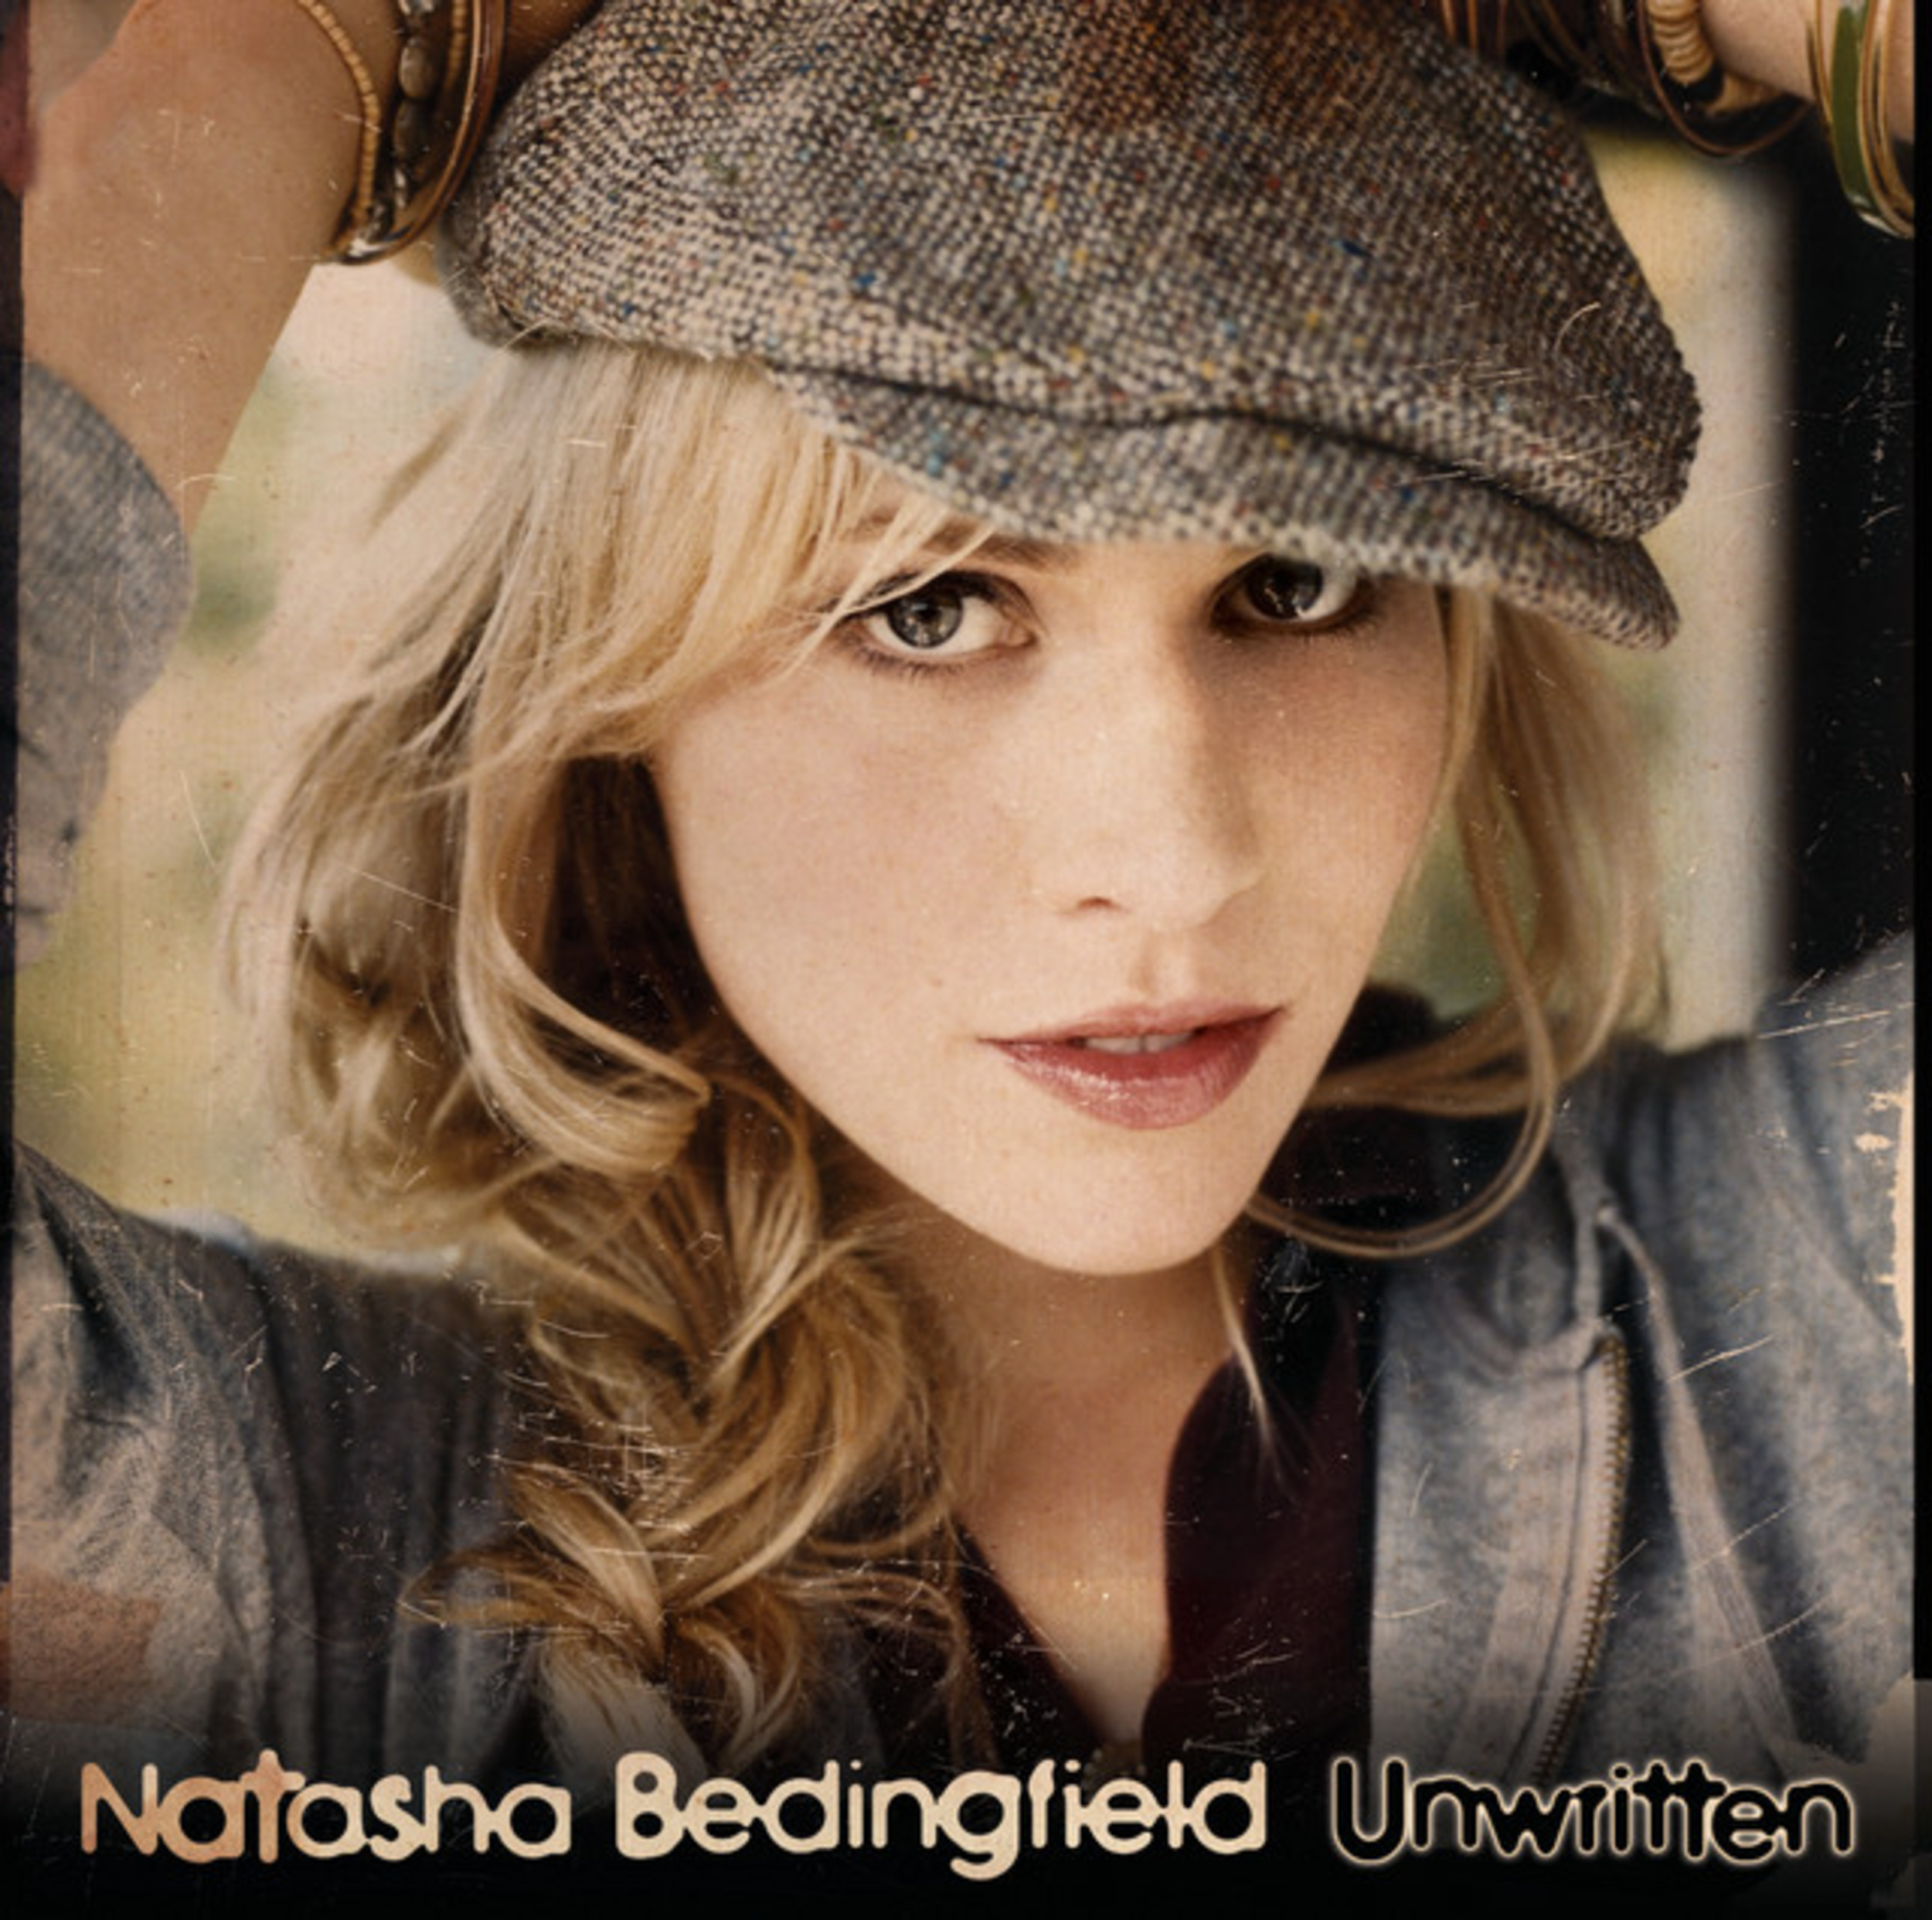 <p>It was back in 2004 when Natasha Bedingfield shook up the pop scene with her debut album, <em>Unwritten.</em> In addition to the eponymous single, other hit tracks included "Single" and <a href="https://www.youtube.com/watch?v=e5RuGj0g1tk">"These Words." </a></p><p><a href='https://www.msn.com/en-us/community/channel/vid-cj9pqbr0vn9in2b6ddcd8sfgpfq6x6utp44fssrv6mc2gtybw0us'>Follow us on MSN to see more of our exclusive entertainment content.</a></p>